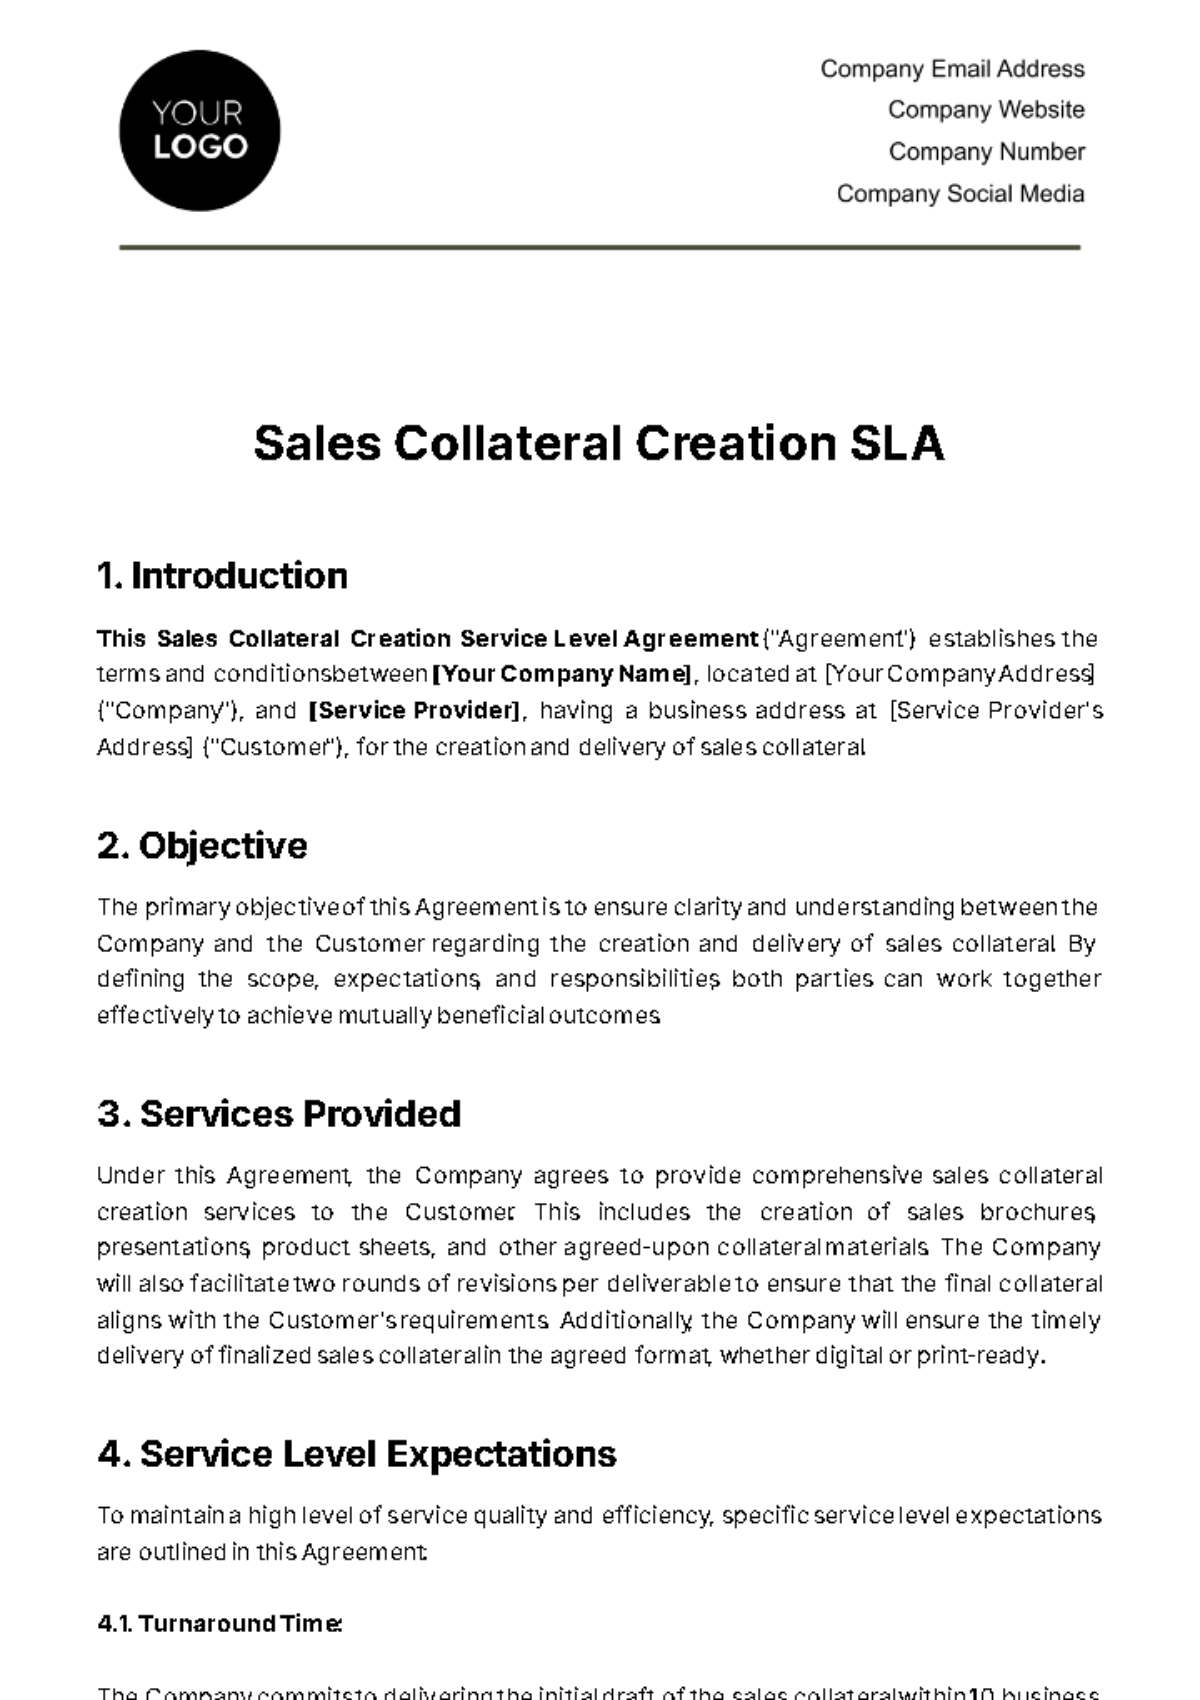 Free Sales Collateral Creation SLA Template